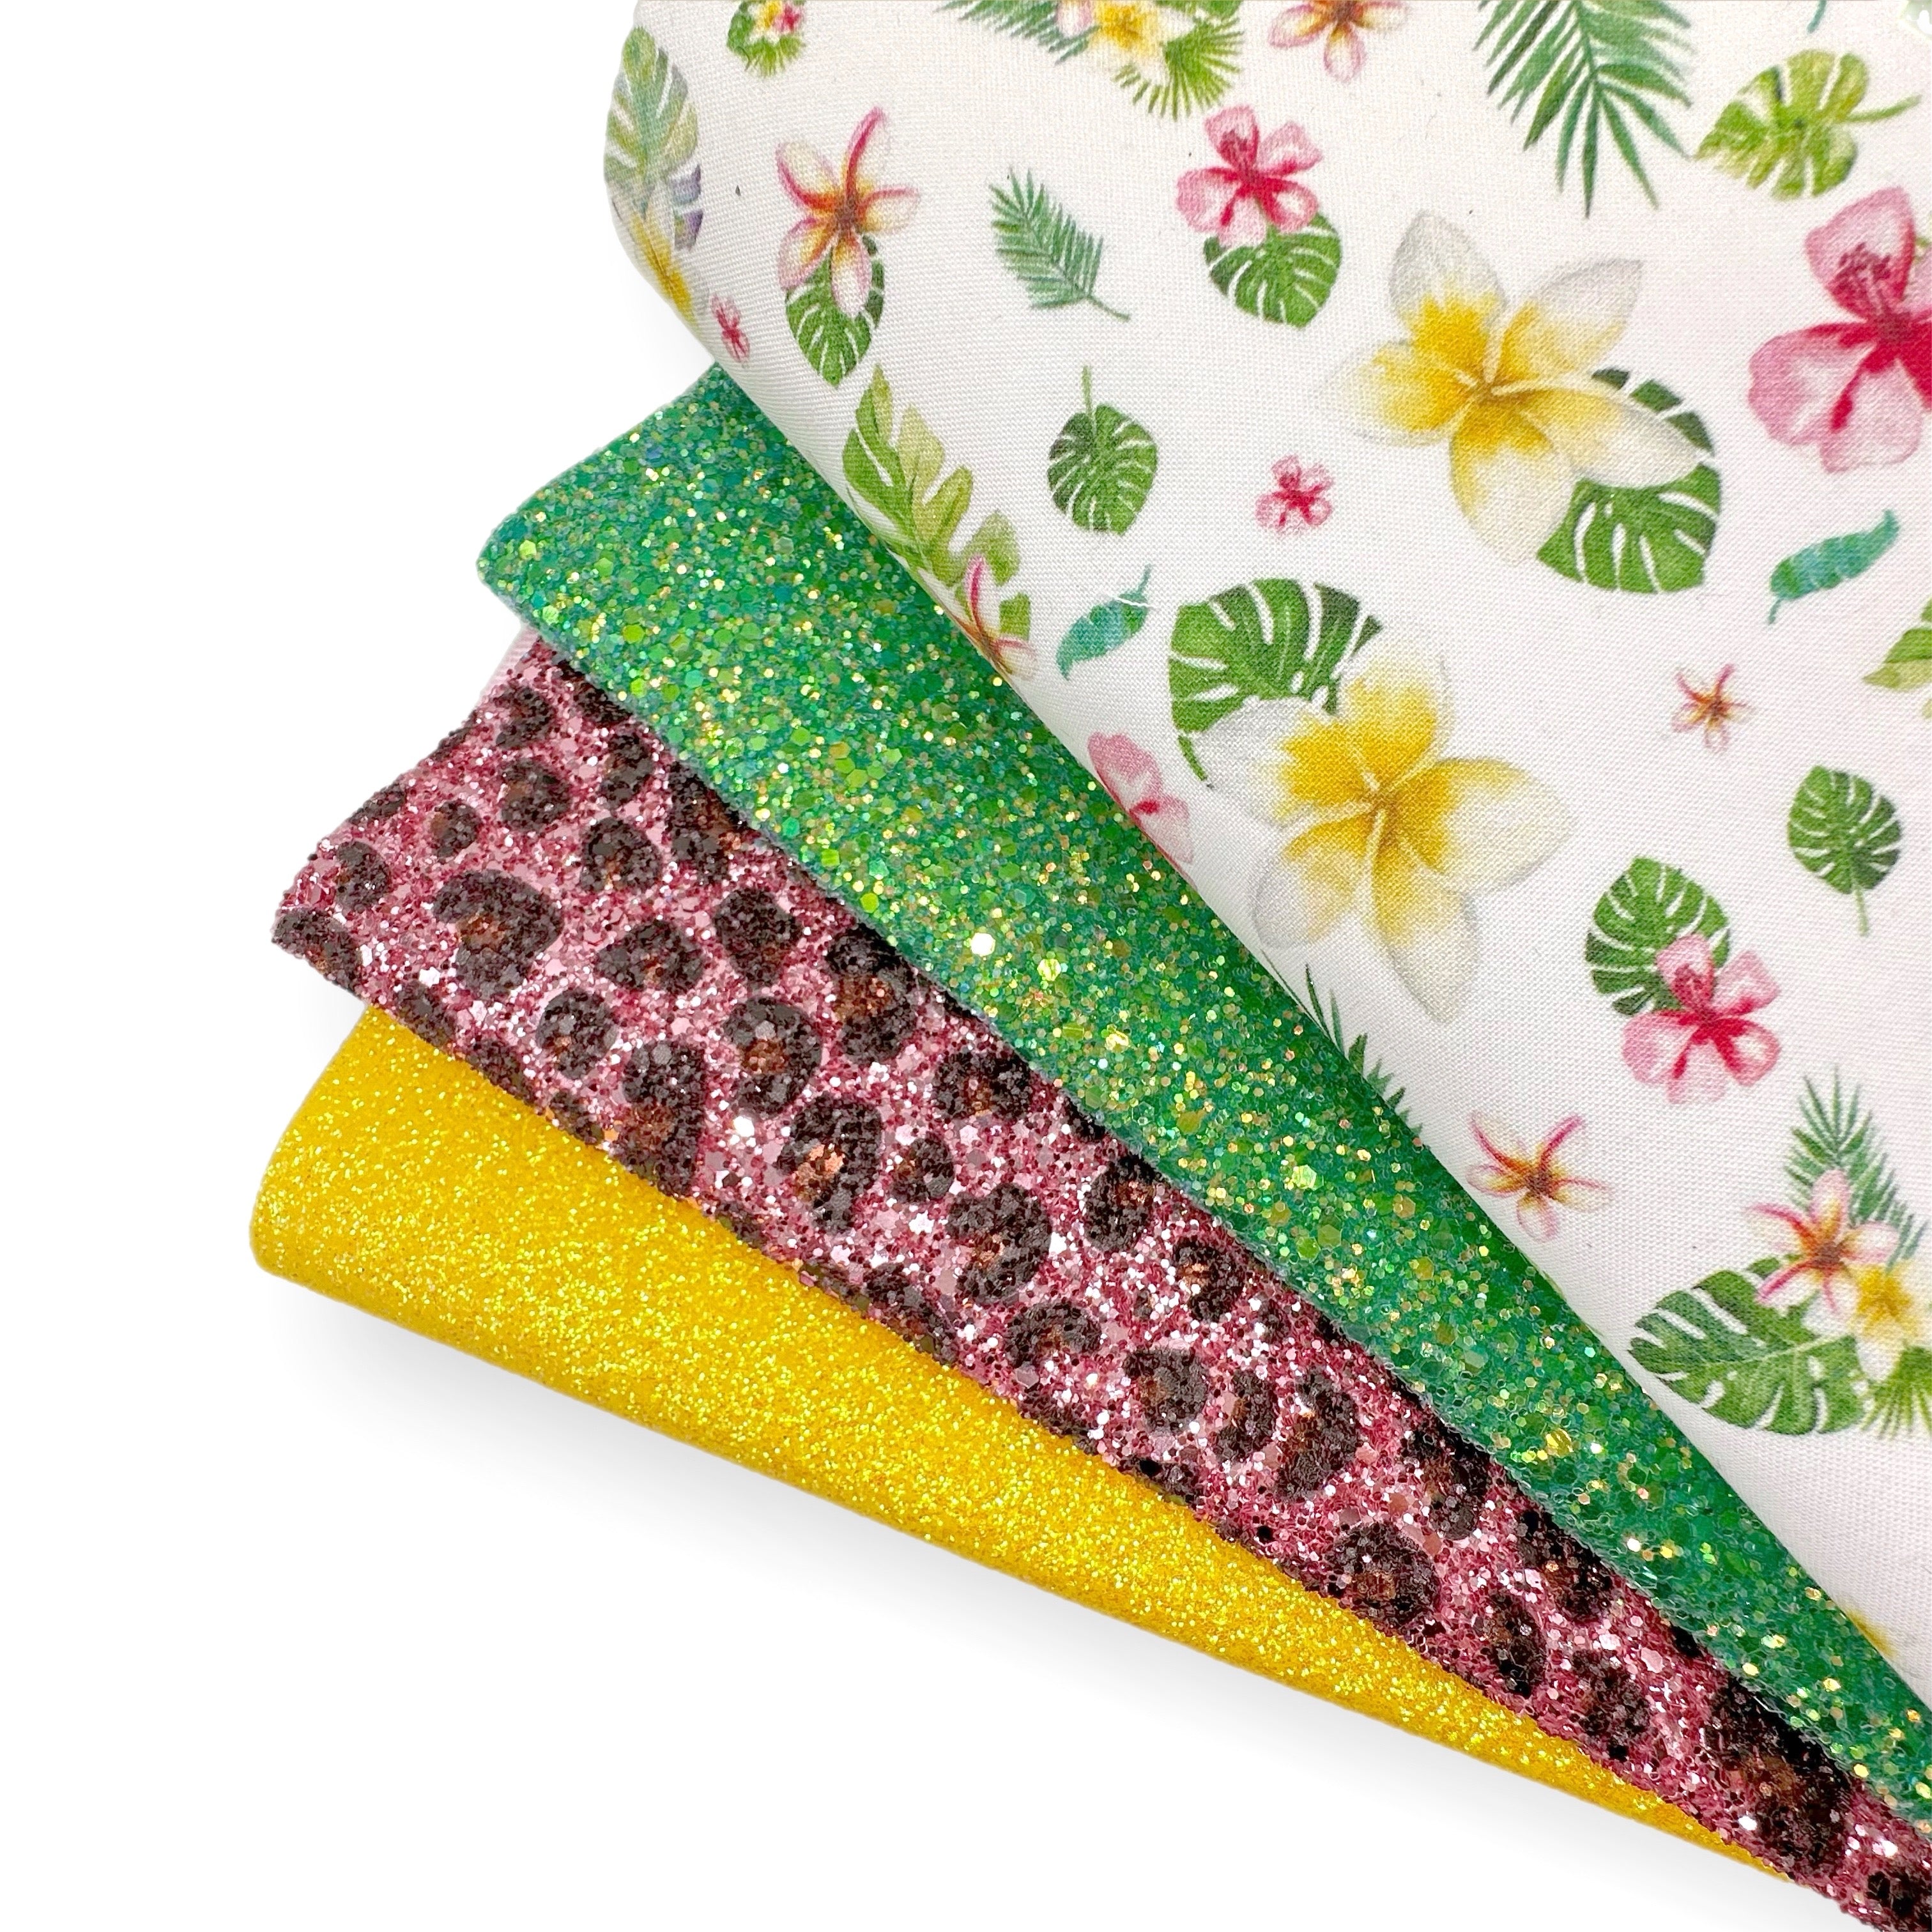 Tropical Vibes- Beautiful Featured Fabrics Collection